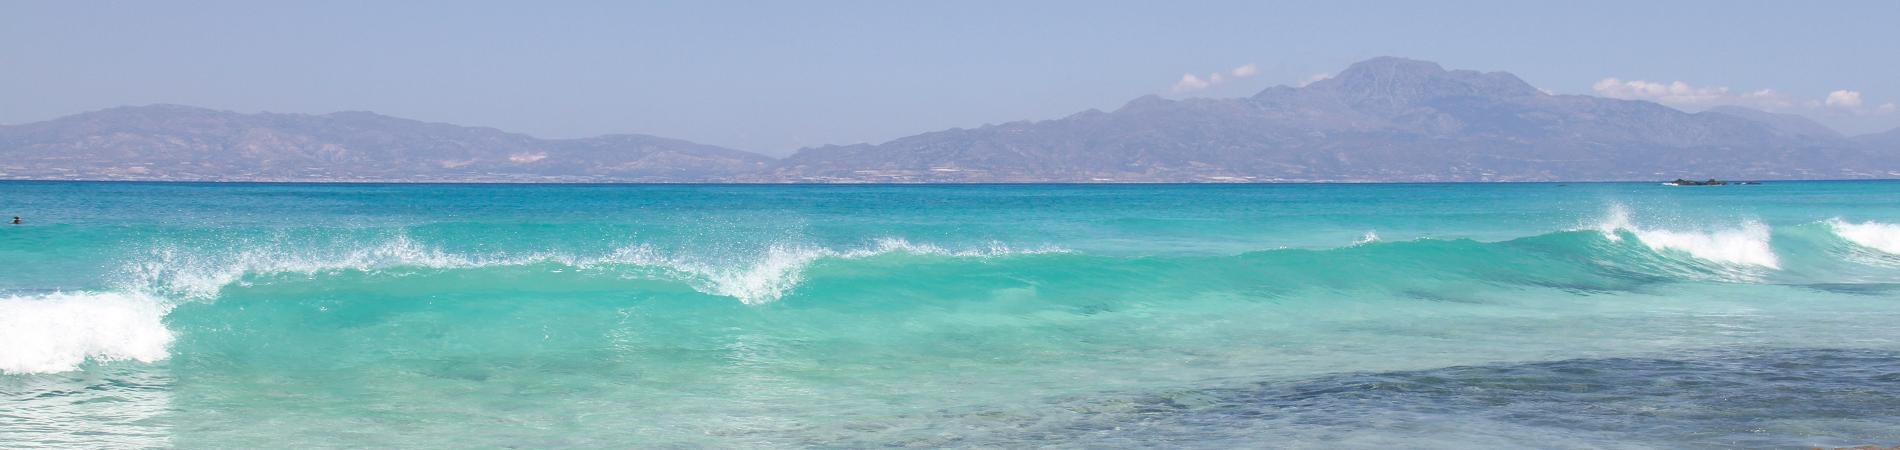 Image for Three reasons to visit Crete